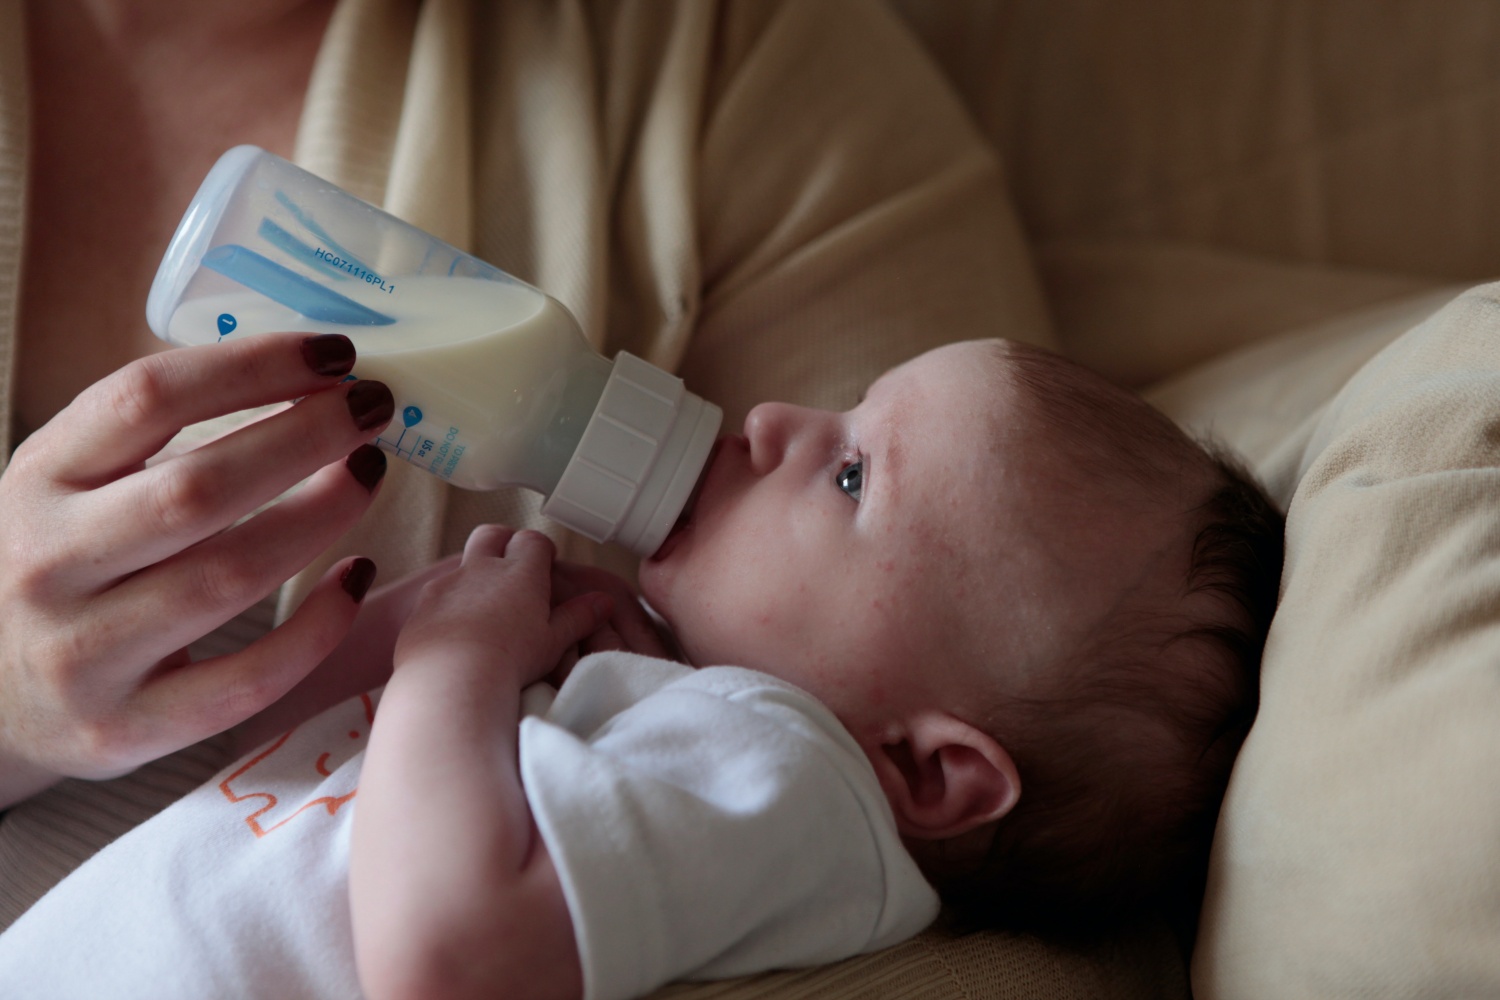 https://1721181113.rsc.cdn77.org/data/images/full/49660/american-academy-of-pediatrics-toddler-milk-unregulated-and-unnecessary-pose-nutritional-risks-for-children-over-12-months.jpg